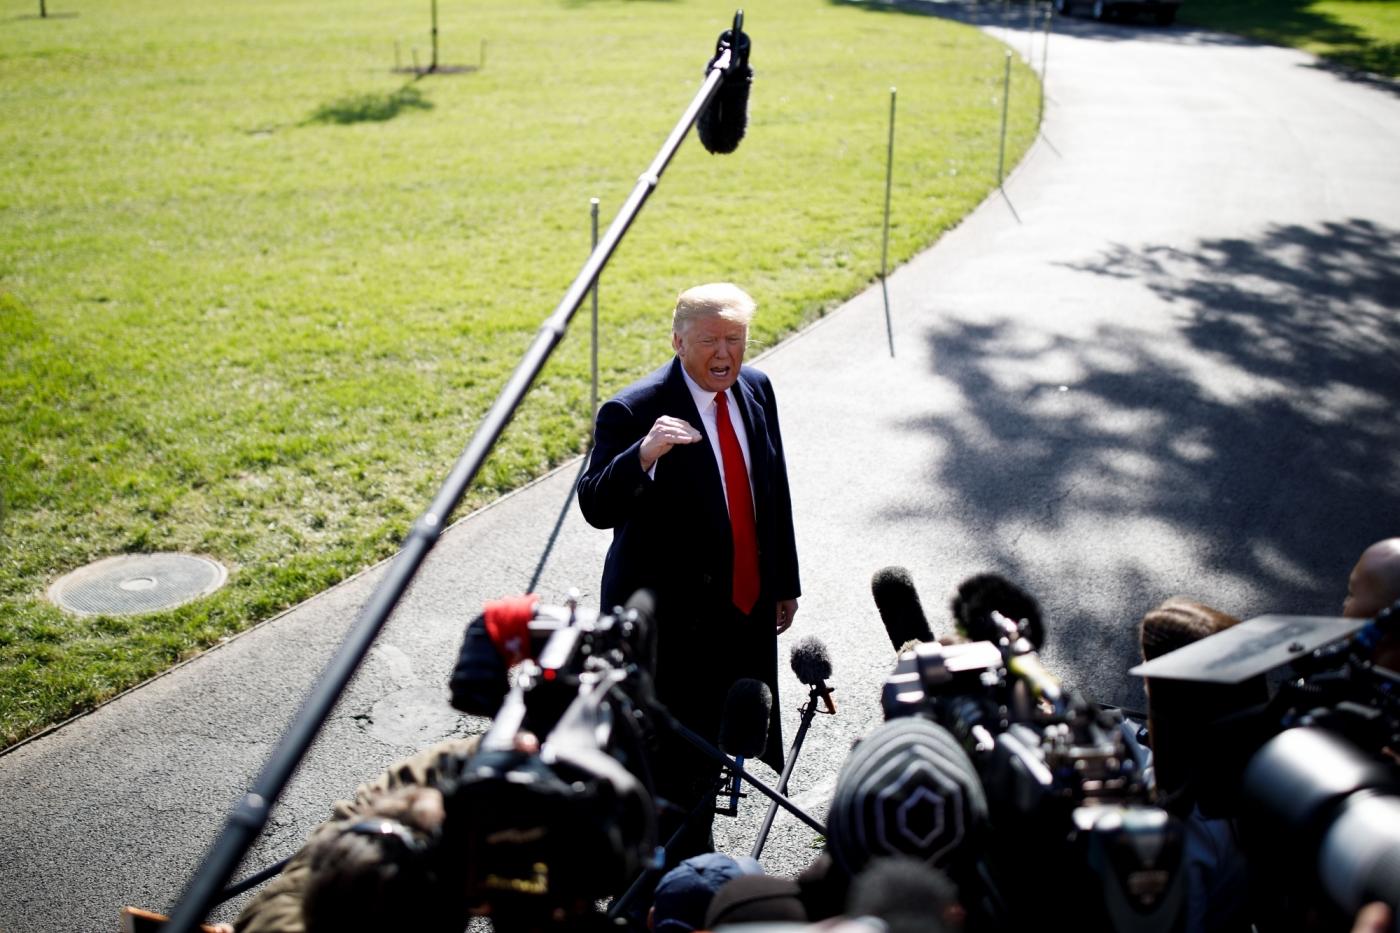 WASHINGTON, Oct. 22, 2018 (Xinhua) -- U.S. President Donald Trump speaks to reporters before departing from the White House in Washington D.C., the United States, on Oct. 22, 2018. Donald Trump said on Monday that his country will begin cutting off or reducing aid to three countries in Central America, citing migrant caravan heading to the U.S. border. (Xinhua/Ting Shen/IANS) by .